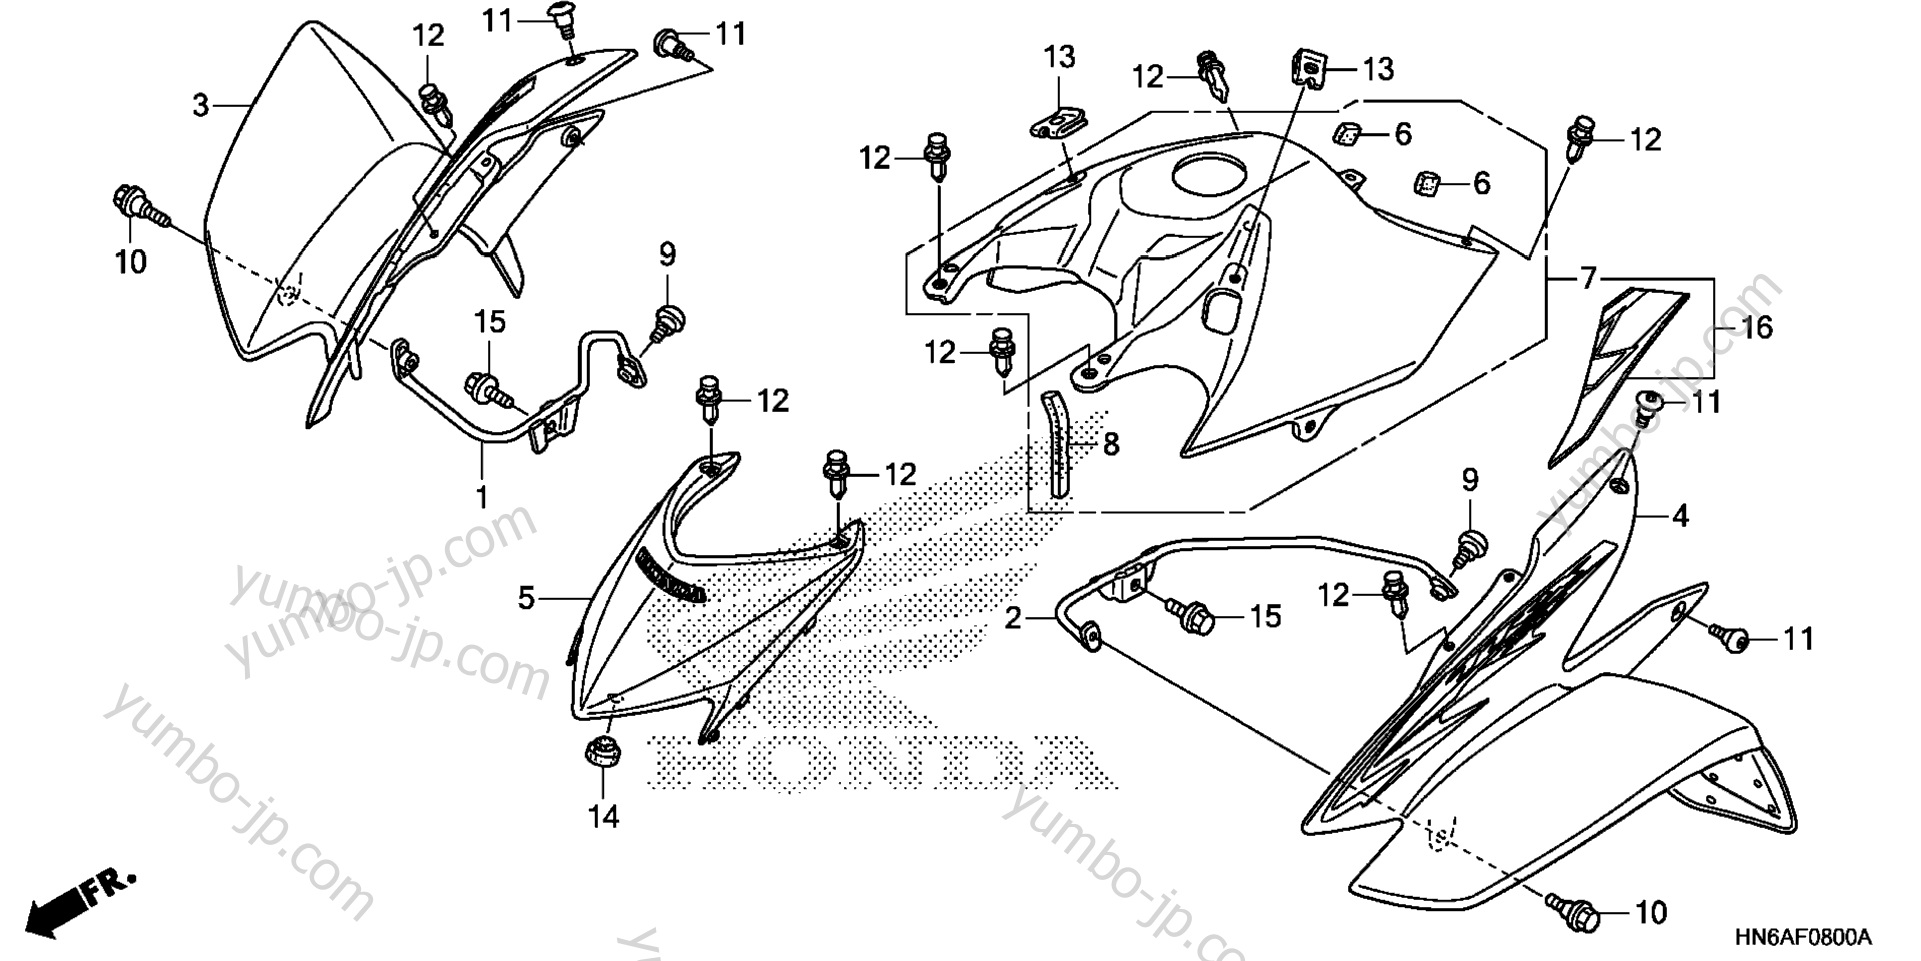 FRONT FENDER for ATVs HONDA TRX250X AC 2013 year